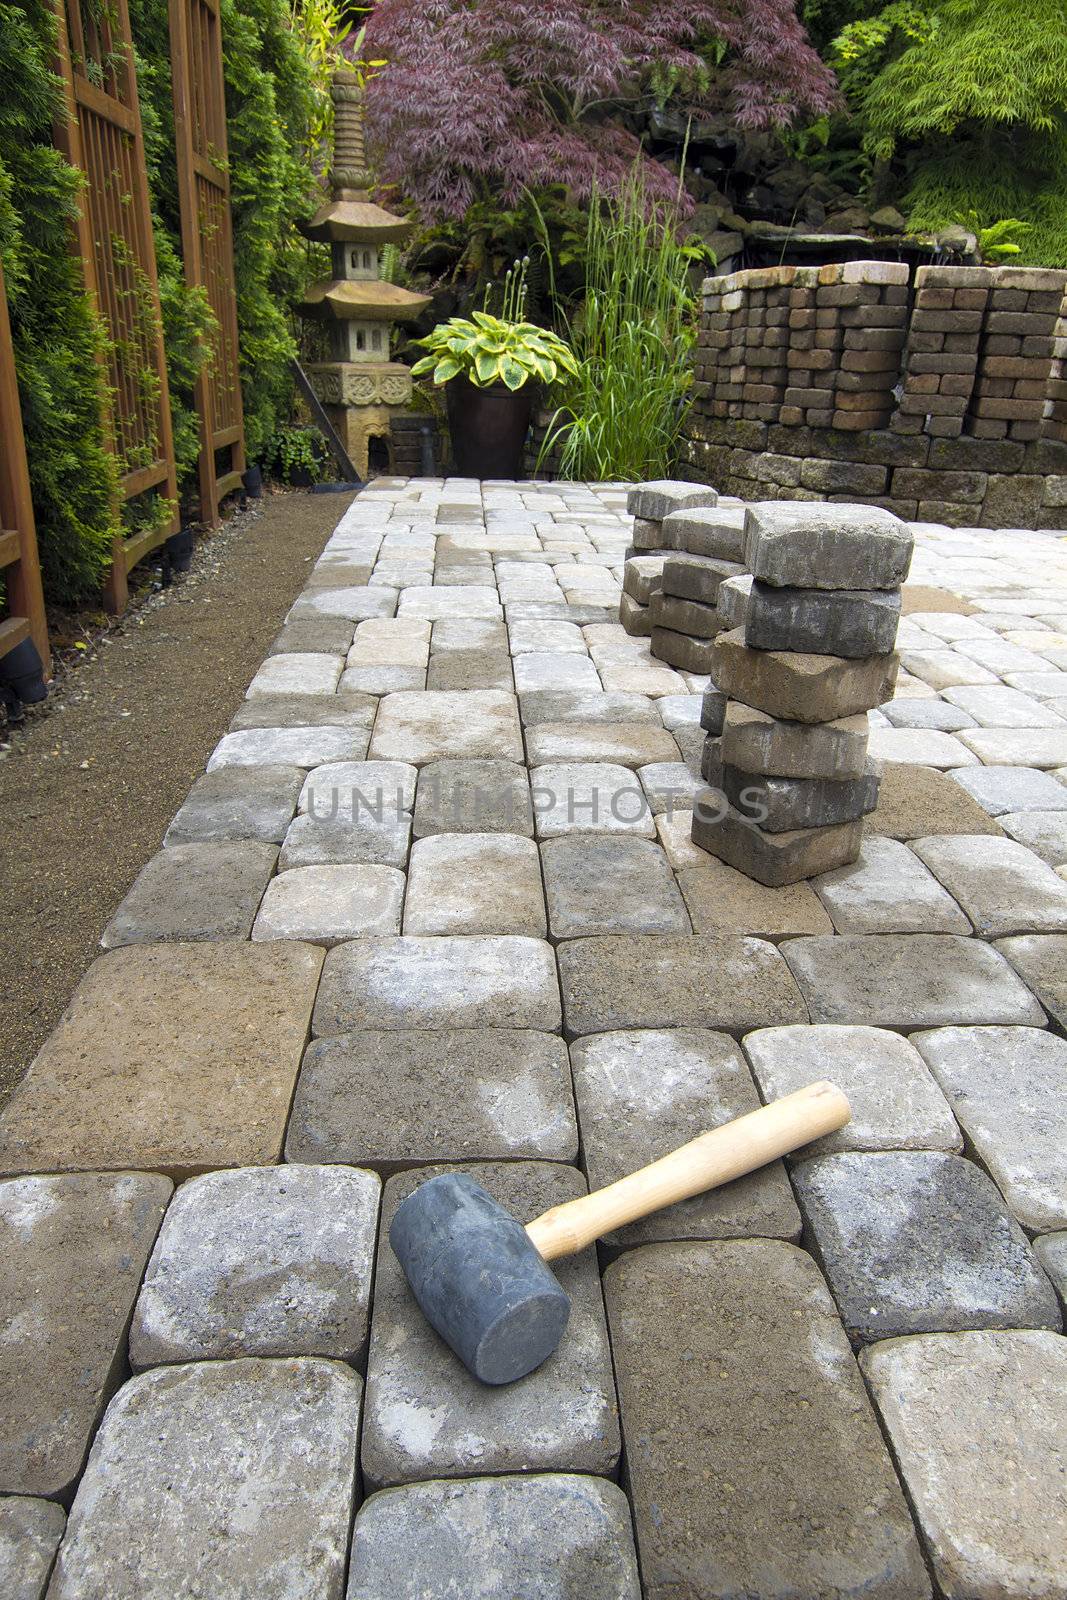 Laying Garden Cement Pavers Patio for Backyard Hardscape Landscaping